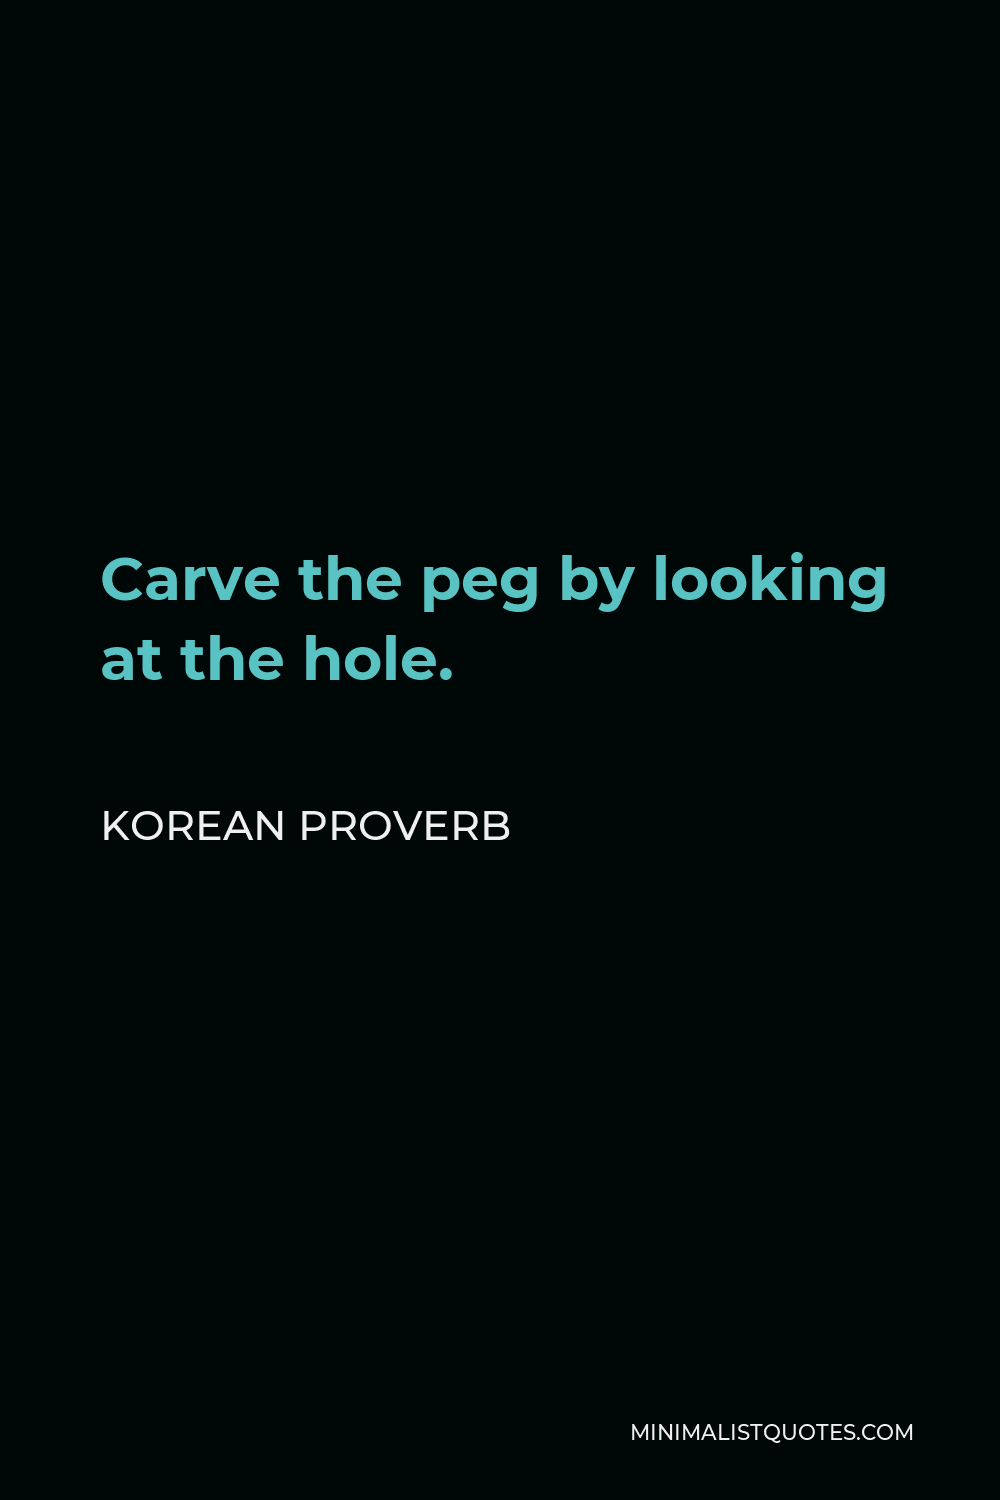 Korean Proverb Quote - Carve the peg by looking at the hole.